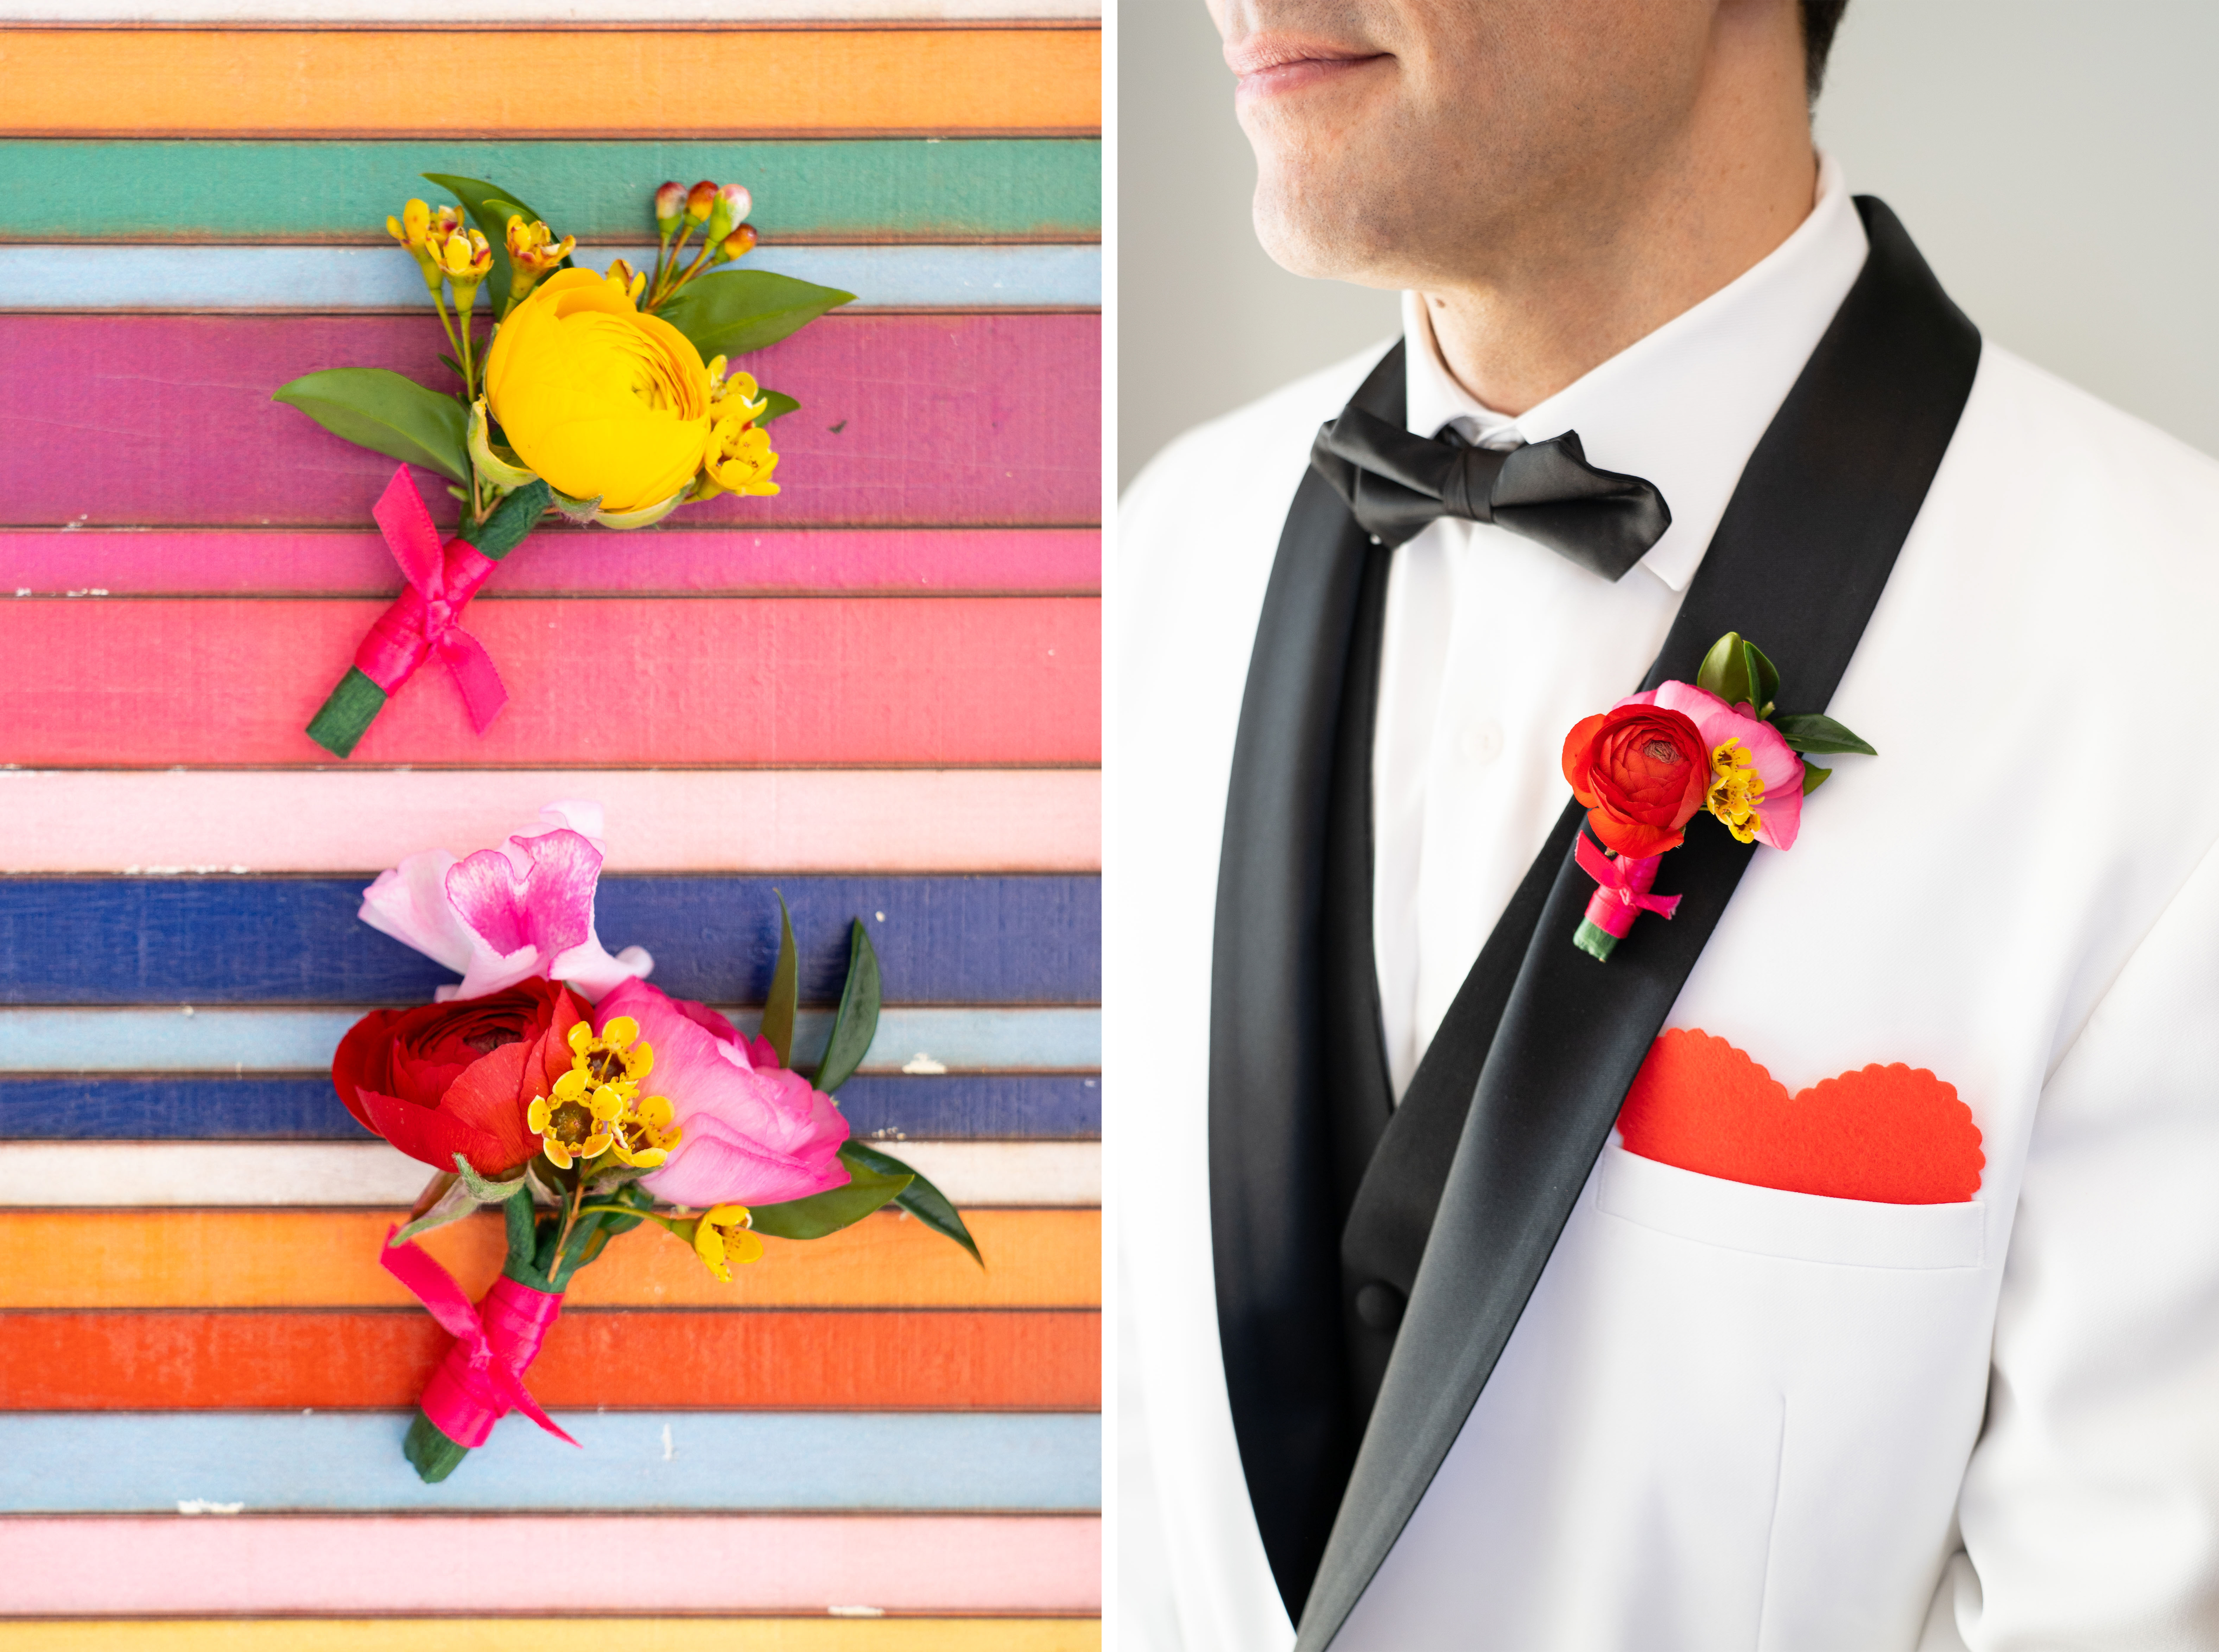 The groom in a retro white suit and black bowtie, donning a vibrant red and pink groom's boutonniere.